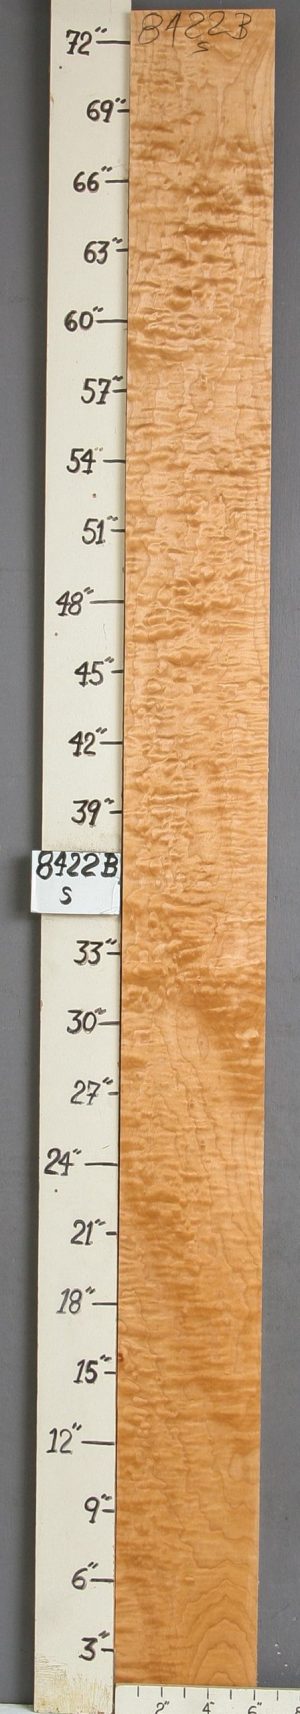 MUSICAL QUILTED MAPLE LUMBER 6"1/8 X 73" X 4/4 (NWT-8422B)